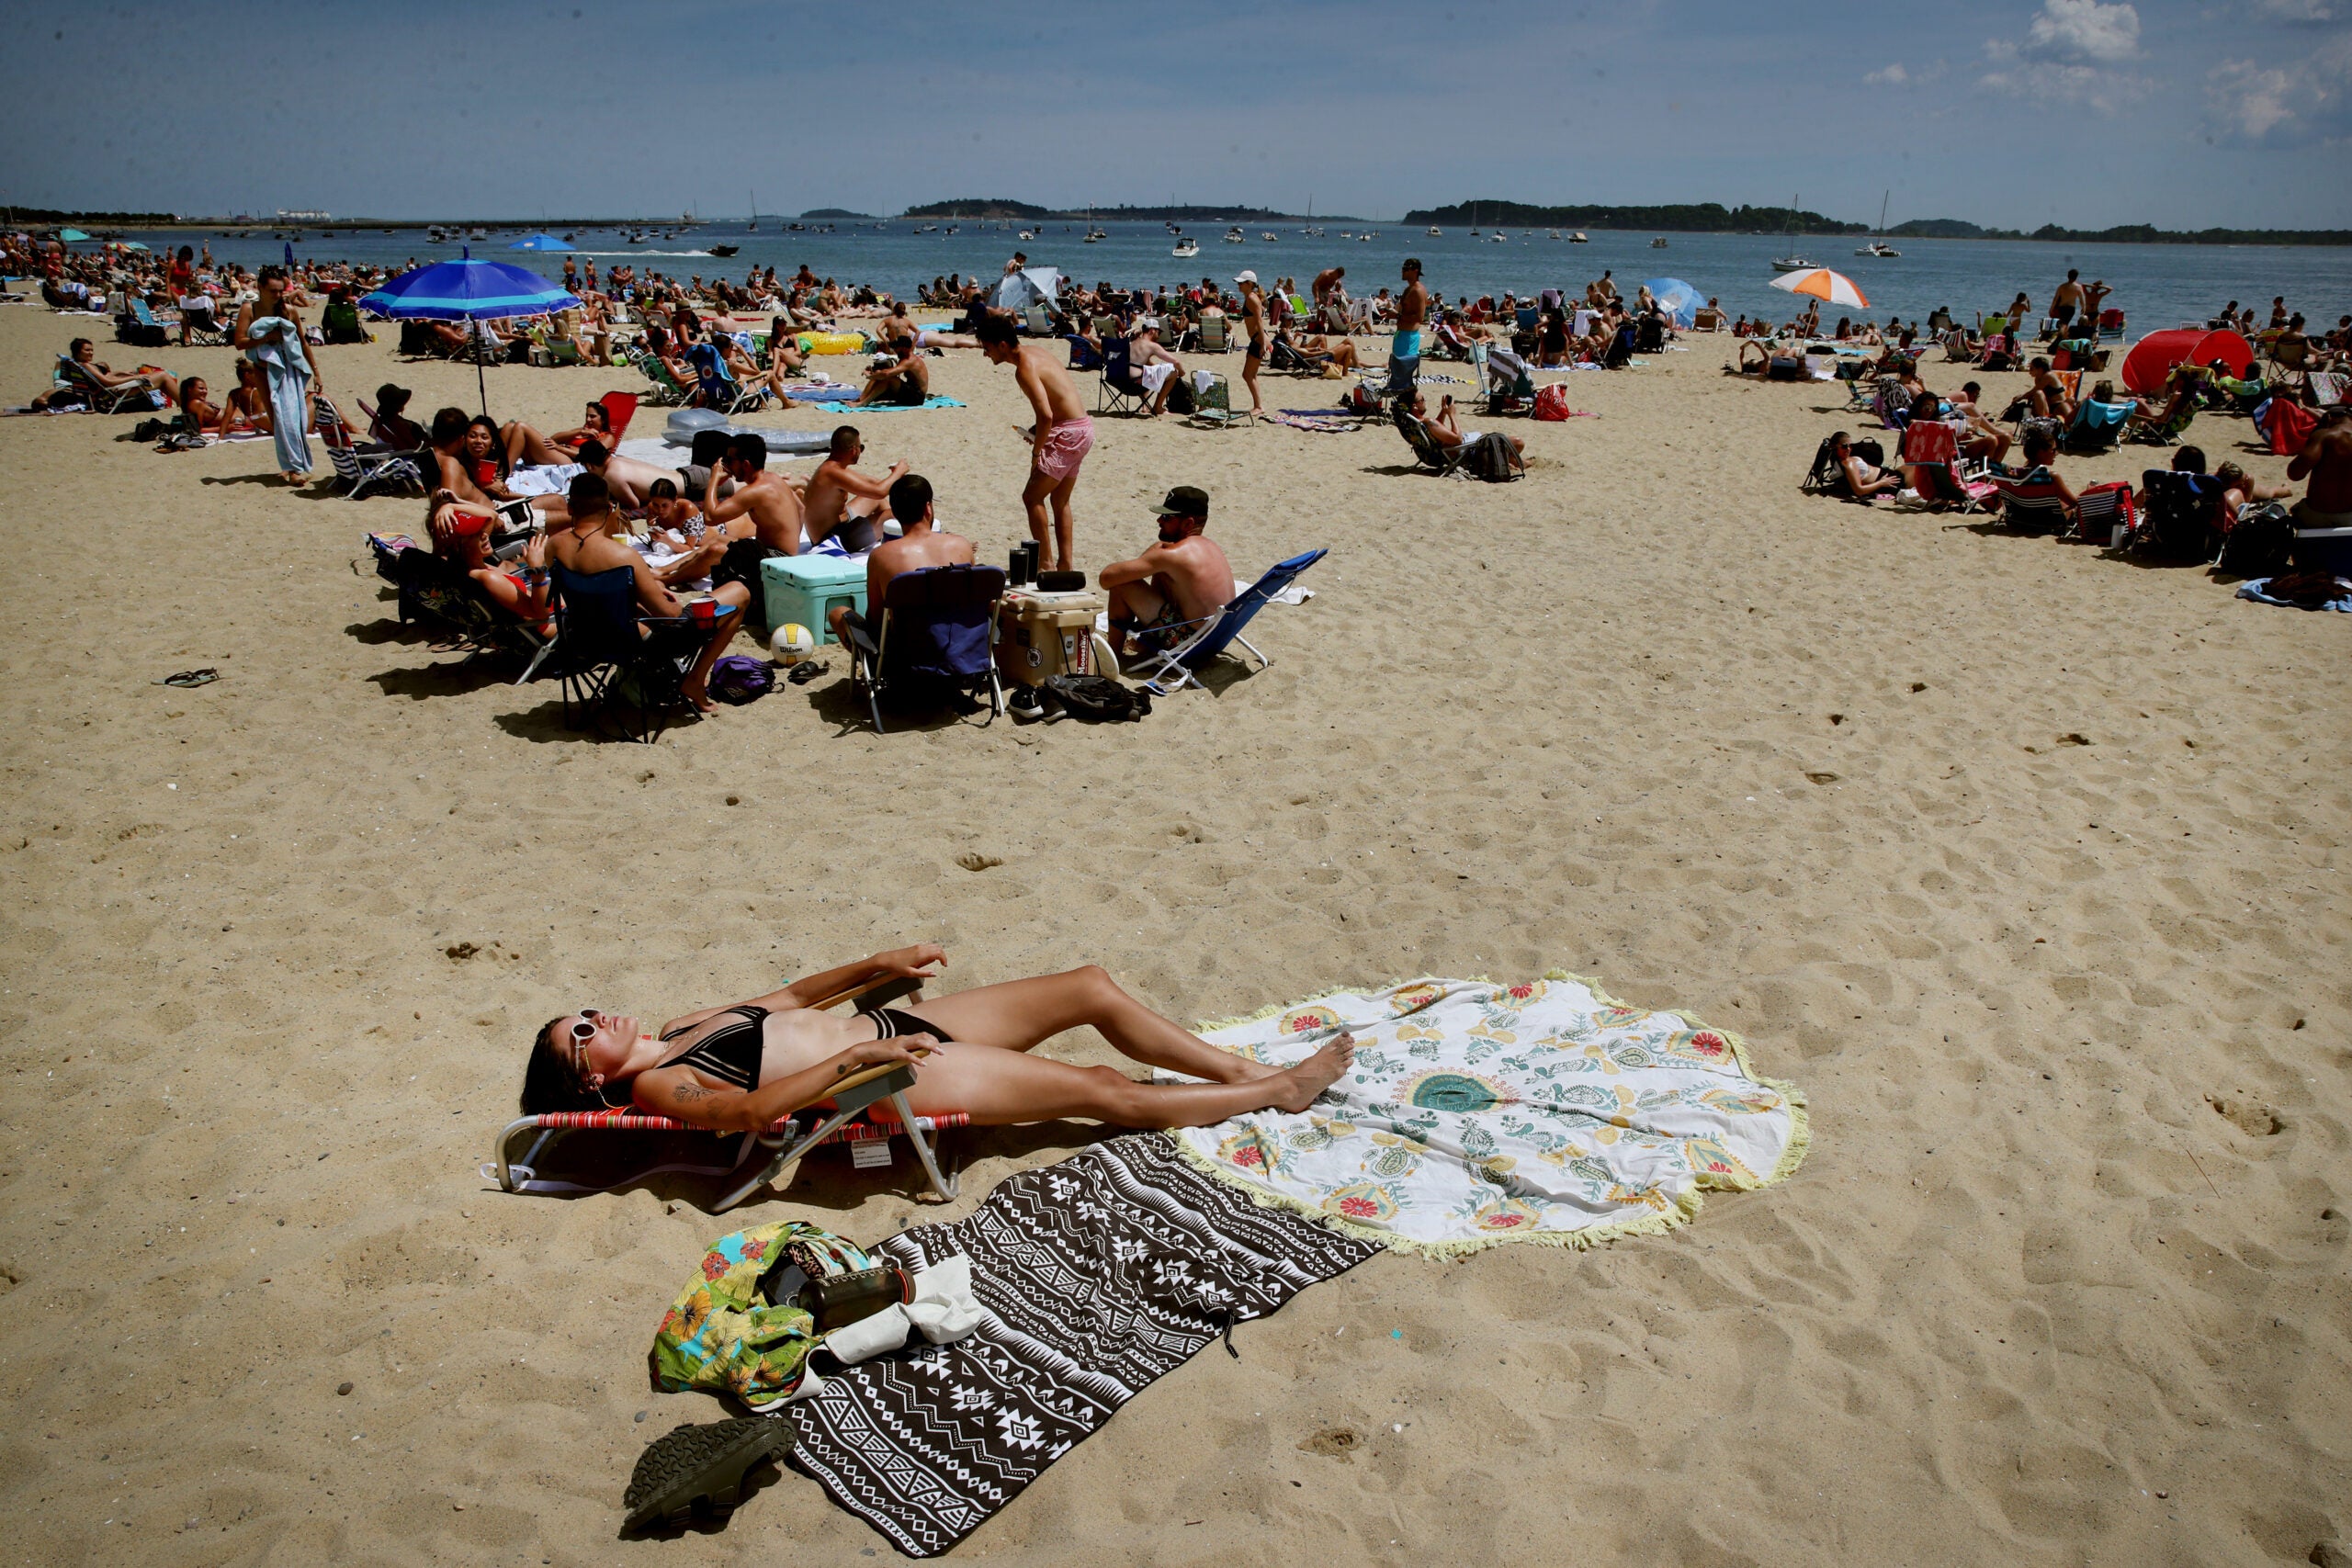 Naked girls on crowded beach Photos It Sure Is Hot Let S See If Anyone Is Social Distancing At M Street Beach